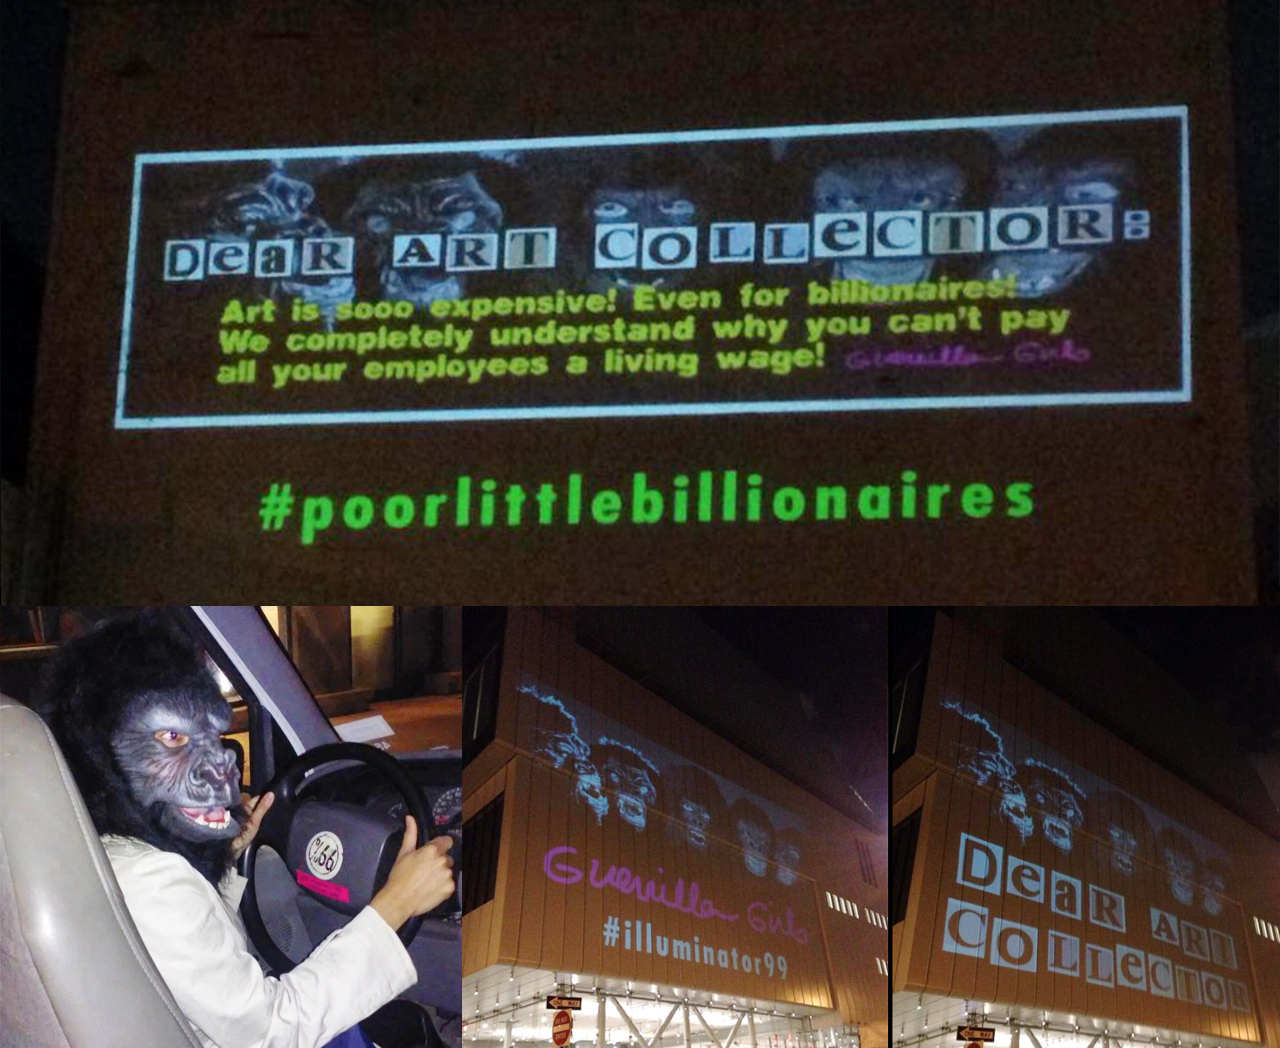 The Illuminator and the Guerrilla Girls appear to have joined forces for a Saturday night projection on the new Whitney Museum (via @illuminator99)